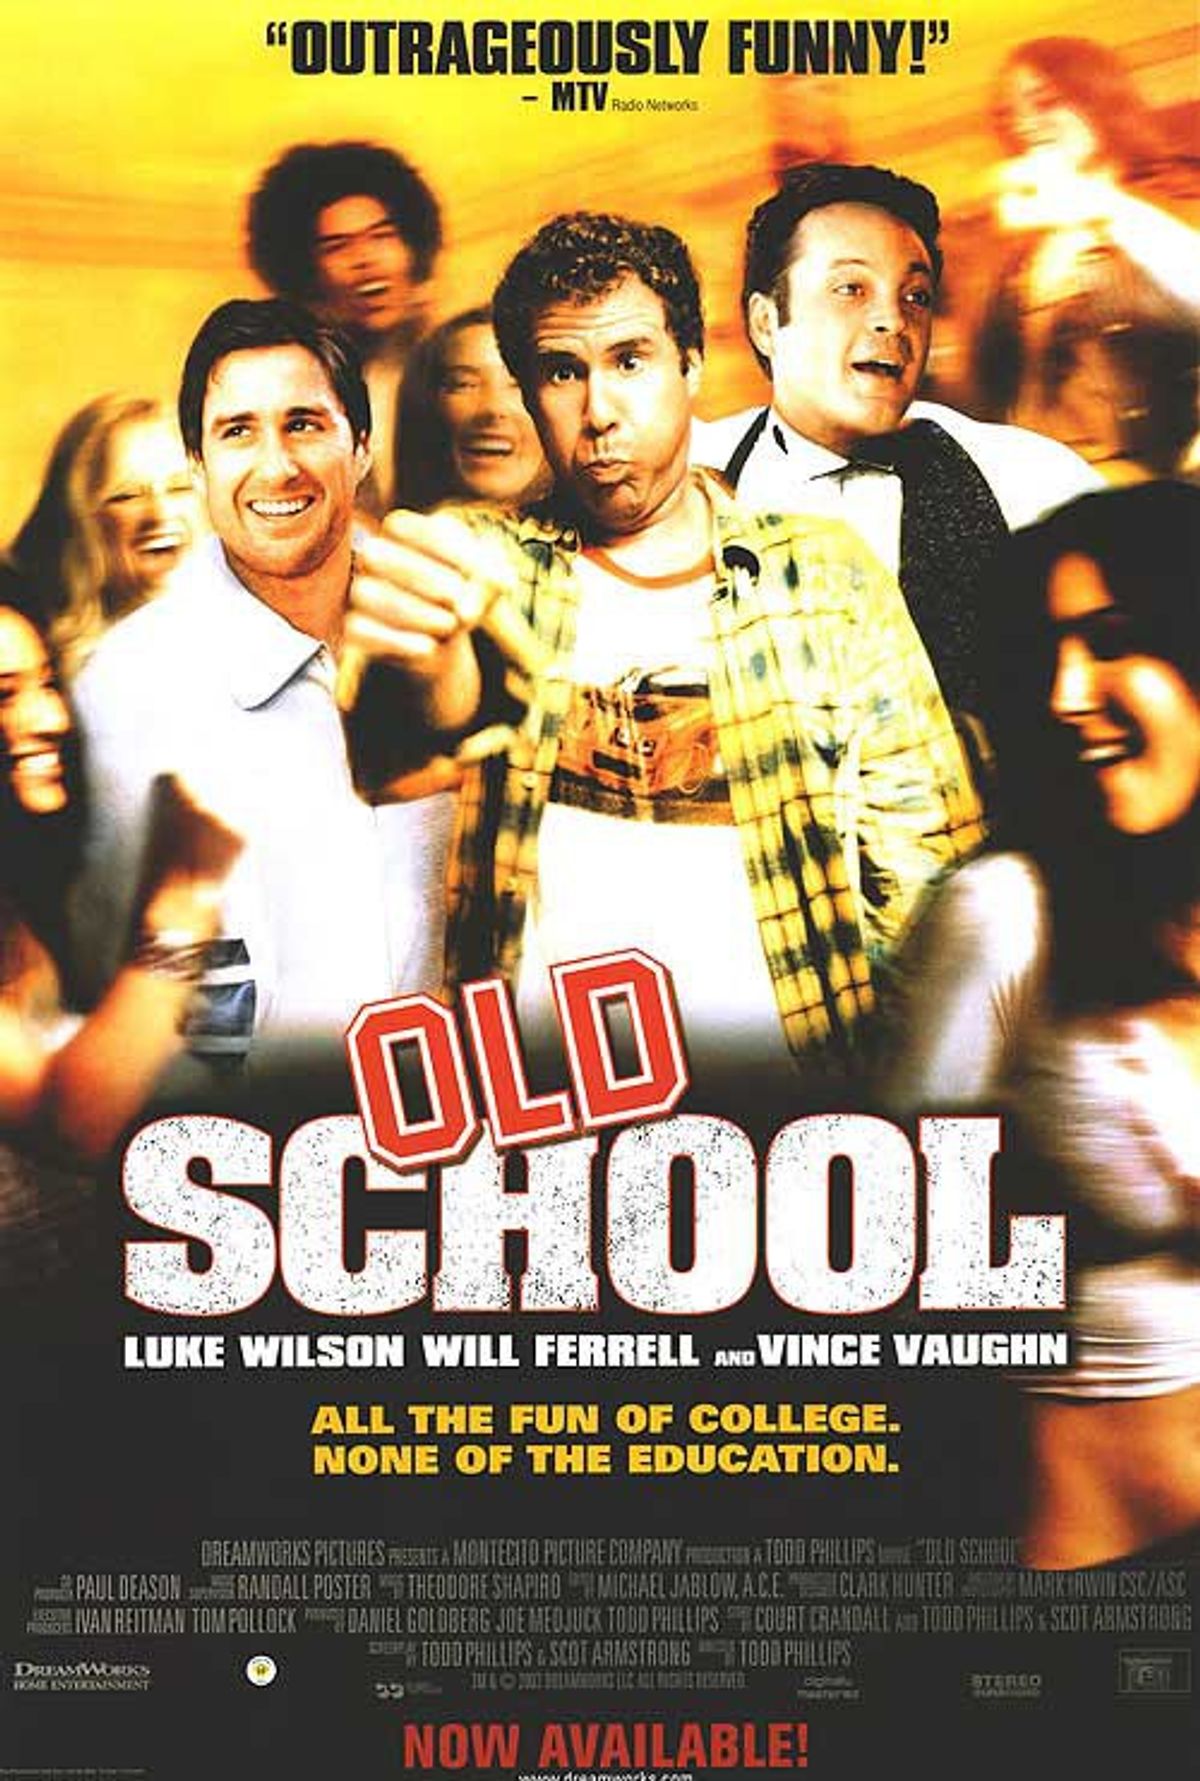 7 Lessons I Learned About College From College Movies